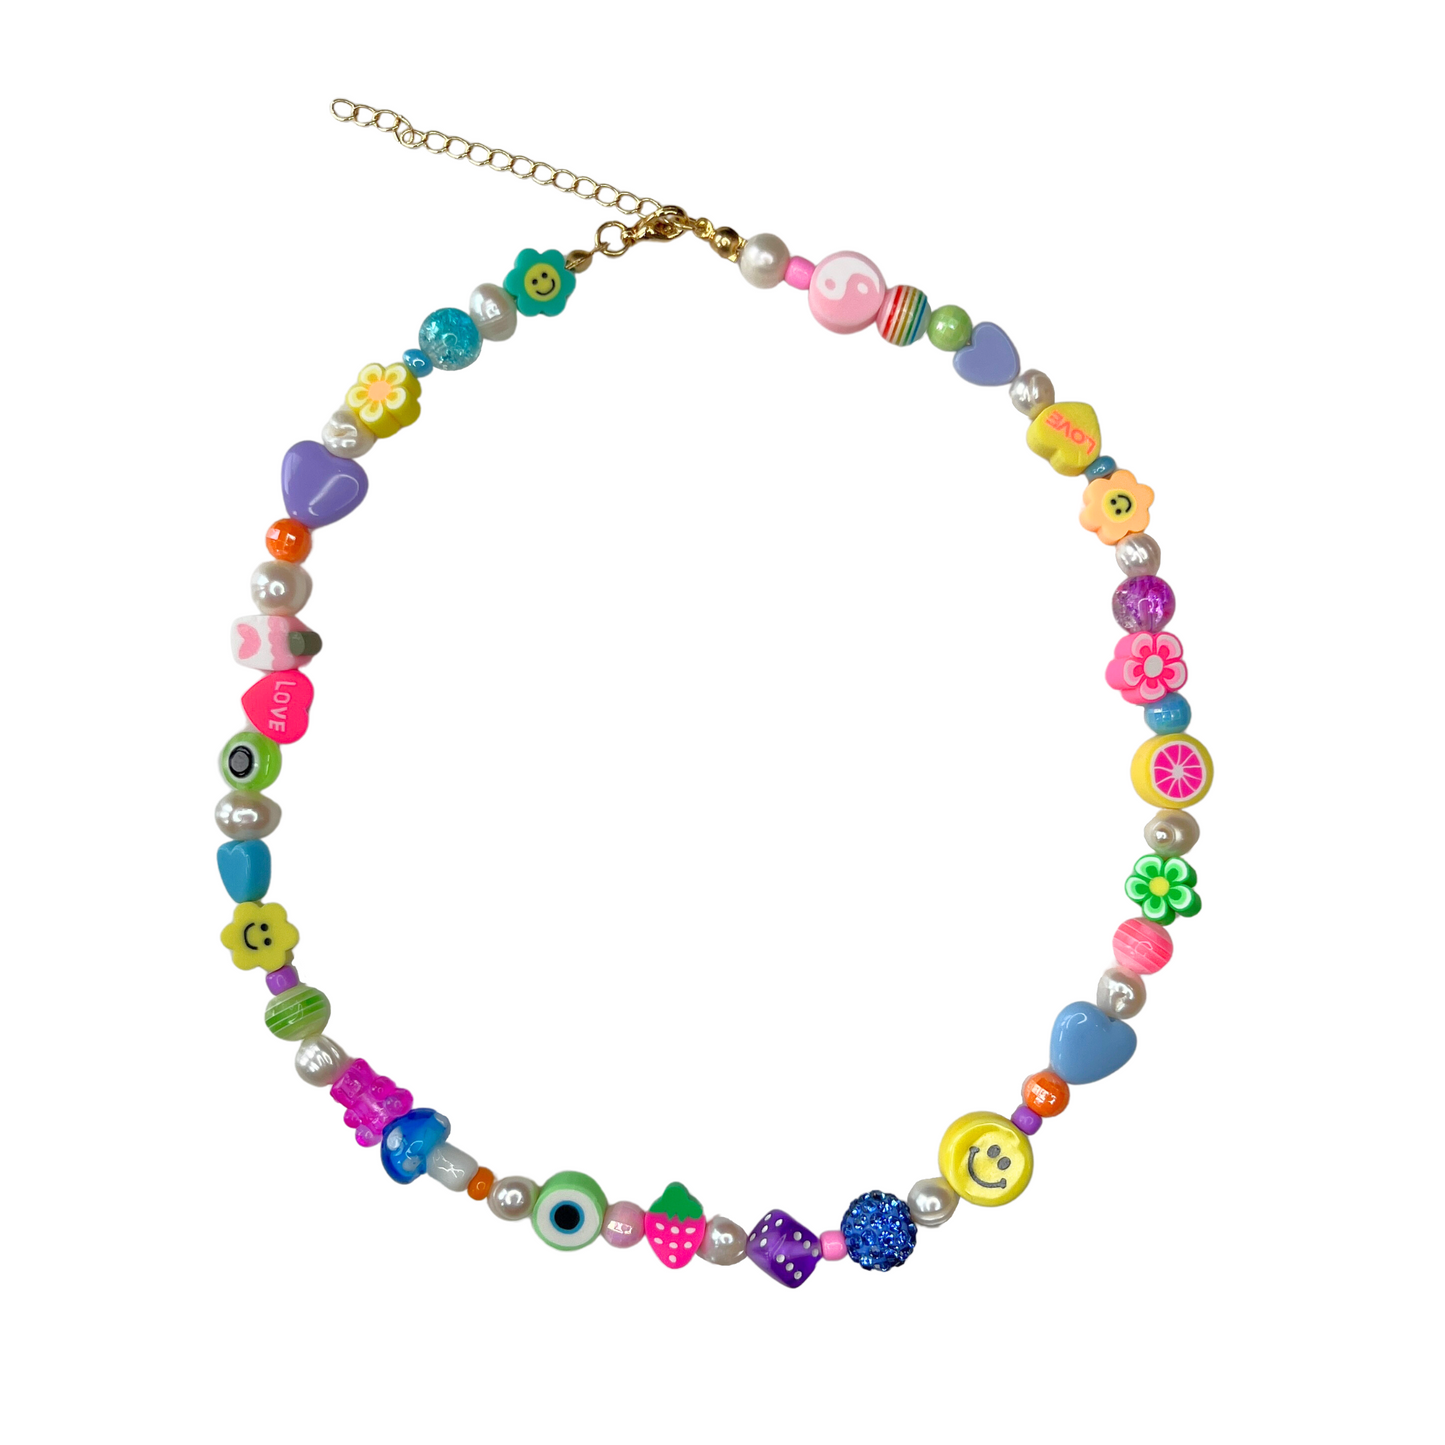 The Candy Queen Necklace